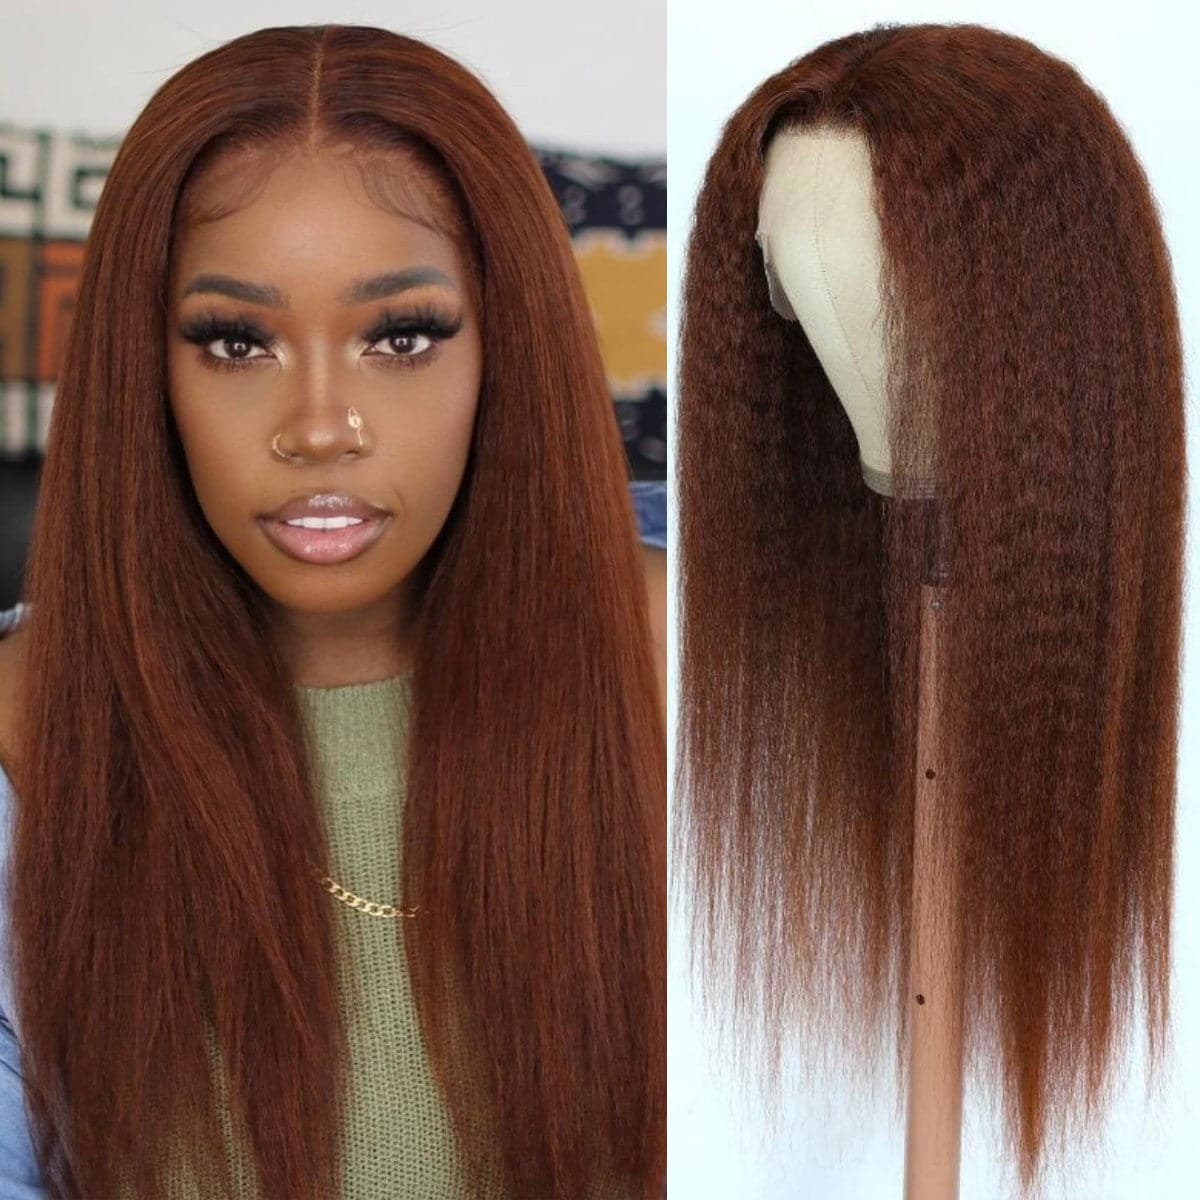 Urgirl 4x4 13x4 Kinky Straight Reddish Brown Lace Front Wig Human Hair Auburn Copper Color for Women